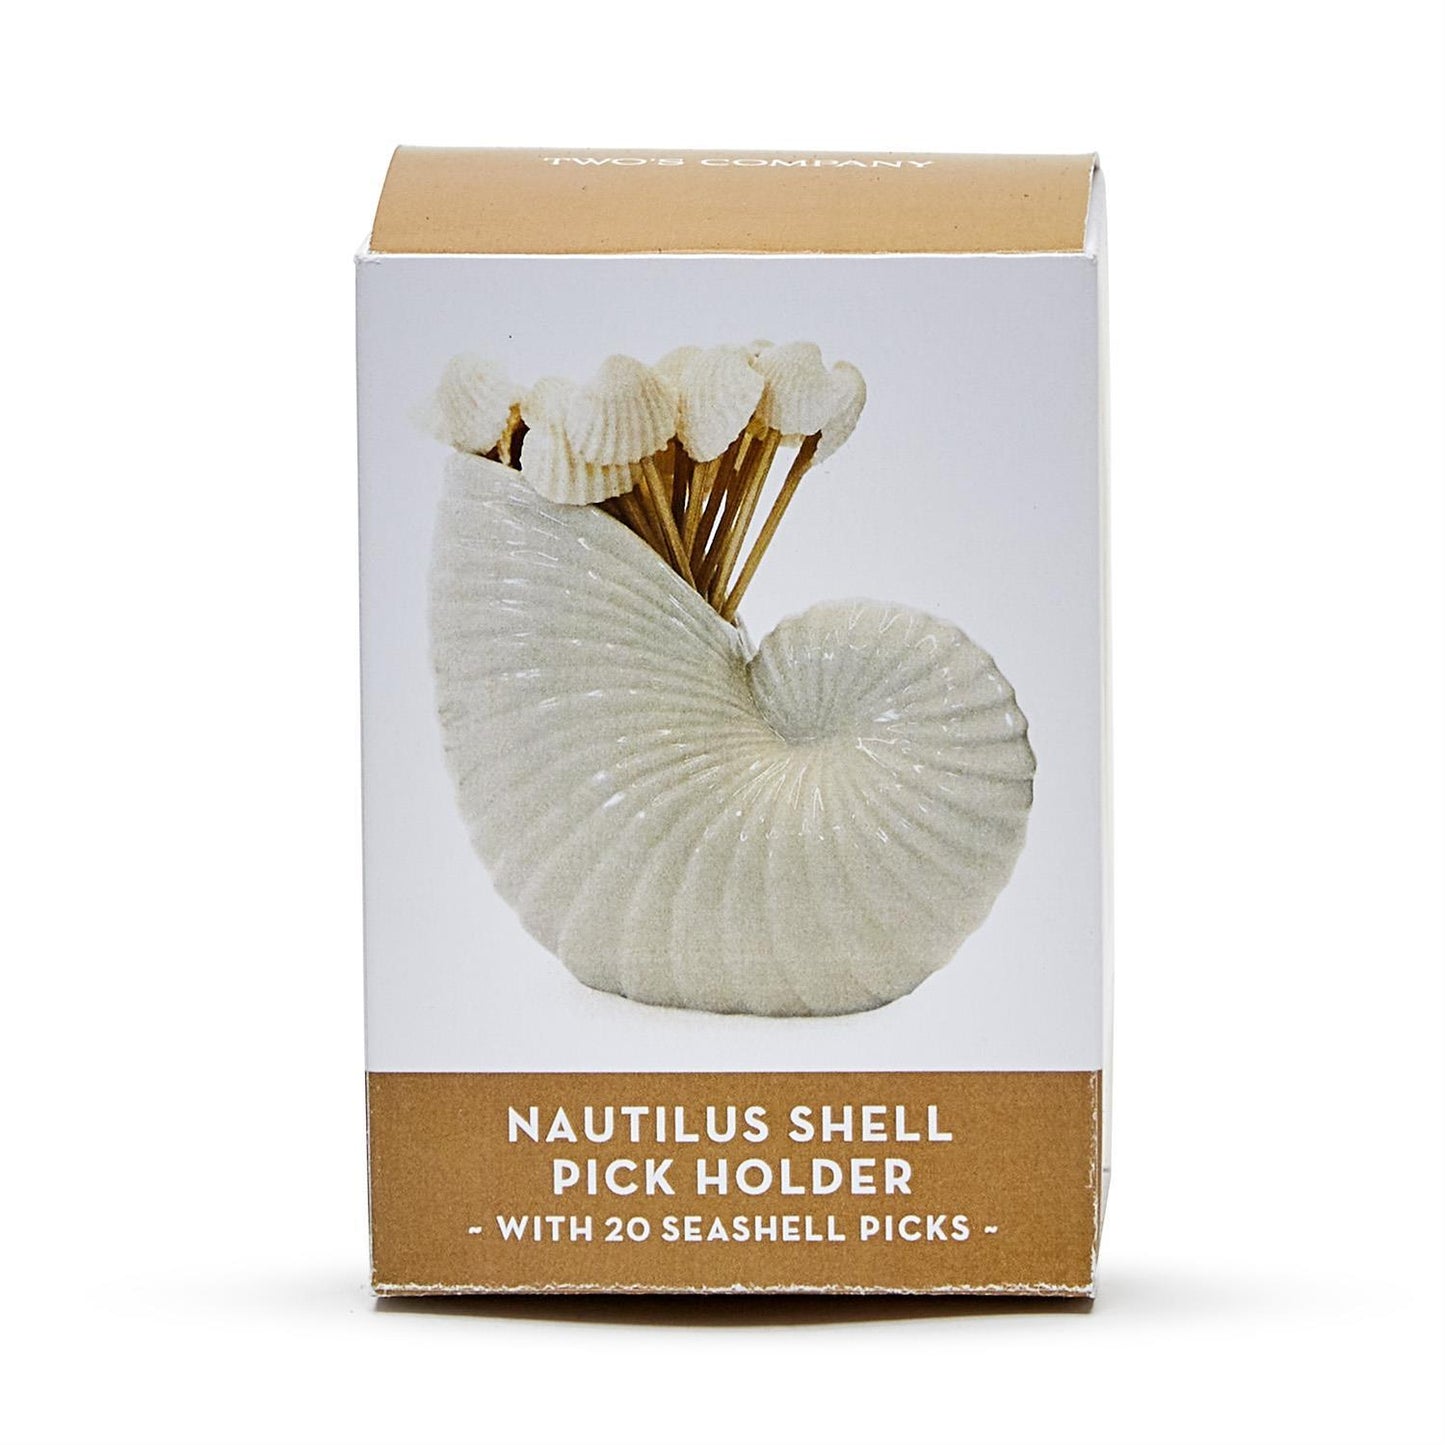 Nautilus Shell Tooth Pick Holder with 20 Seashell Picks in Gift Box - Mellow Monkey